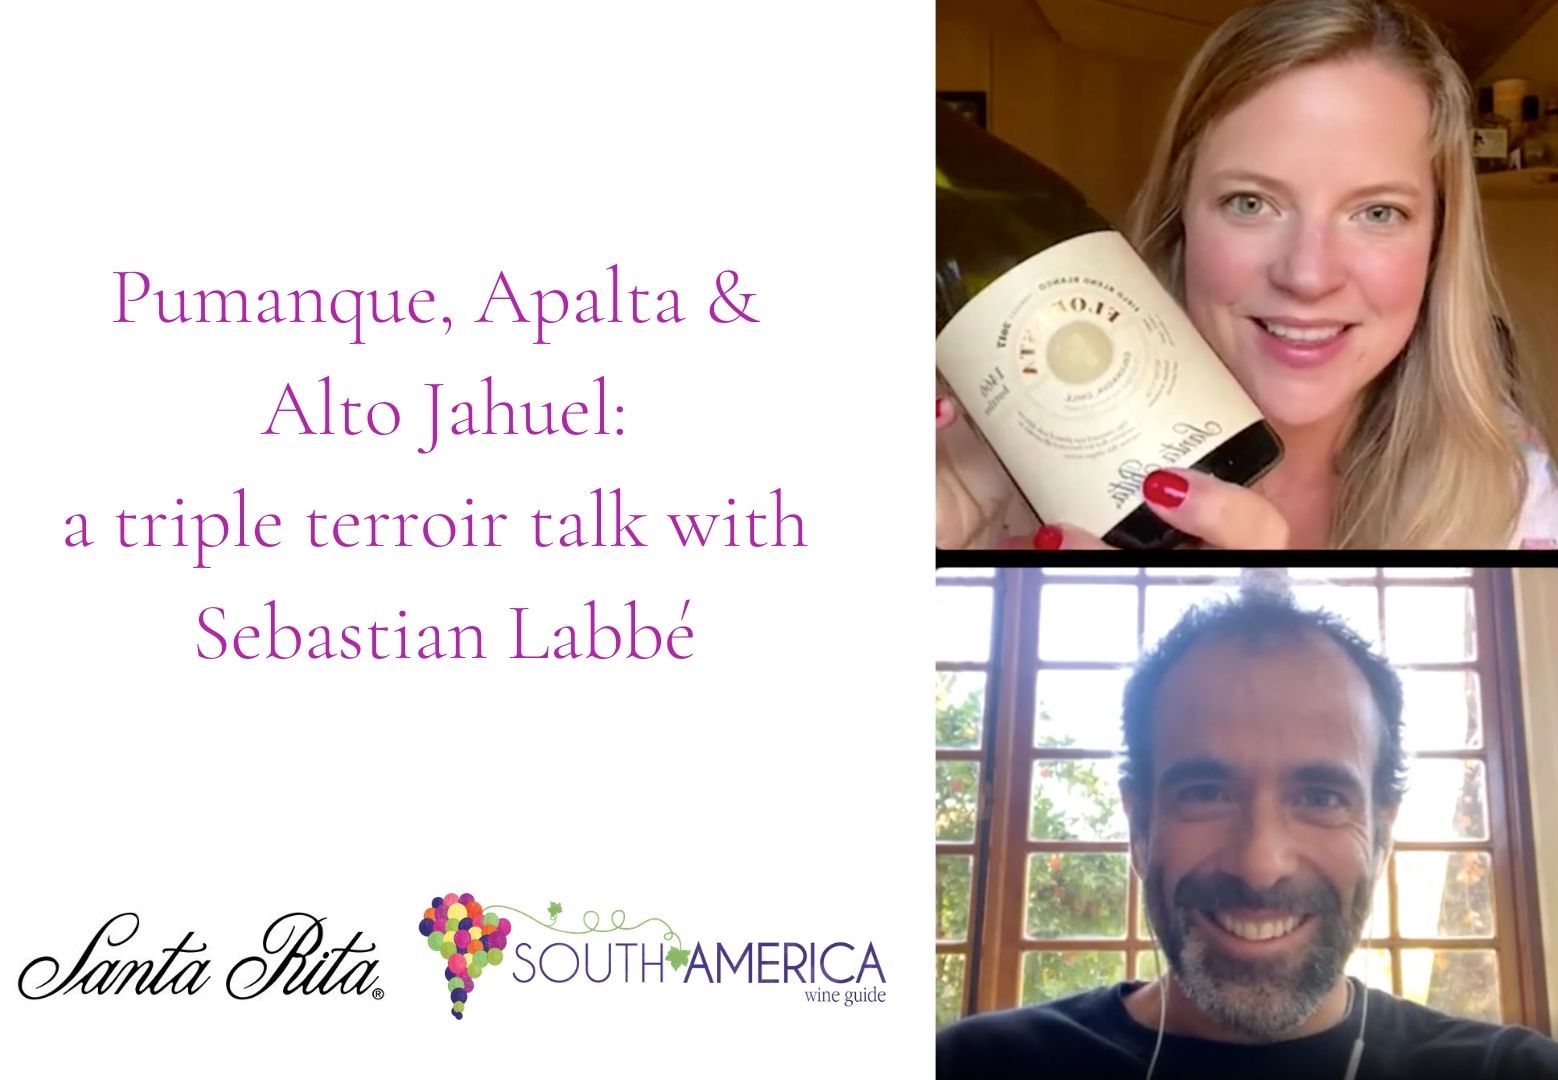 Terroir talk and interview with Sebastian Labbe, winemaker at Santa Rita, talking about the Floresta range and terroirs of Apalta, Pumanque and Maipo Alto Jahuel with Amanda Barnes, author of The South America Wine Guide